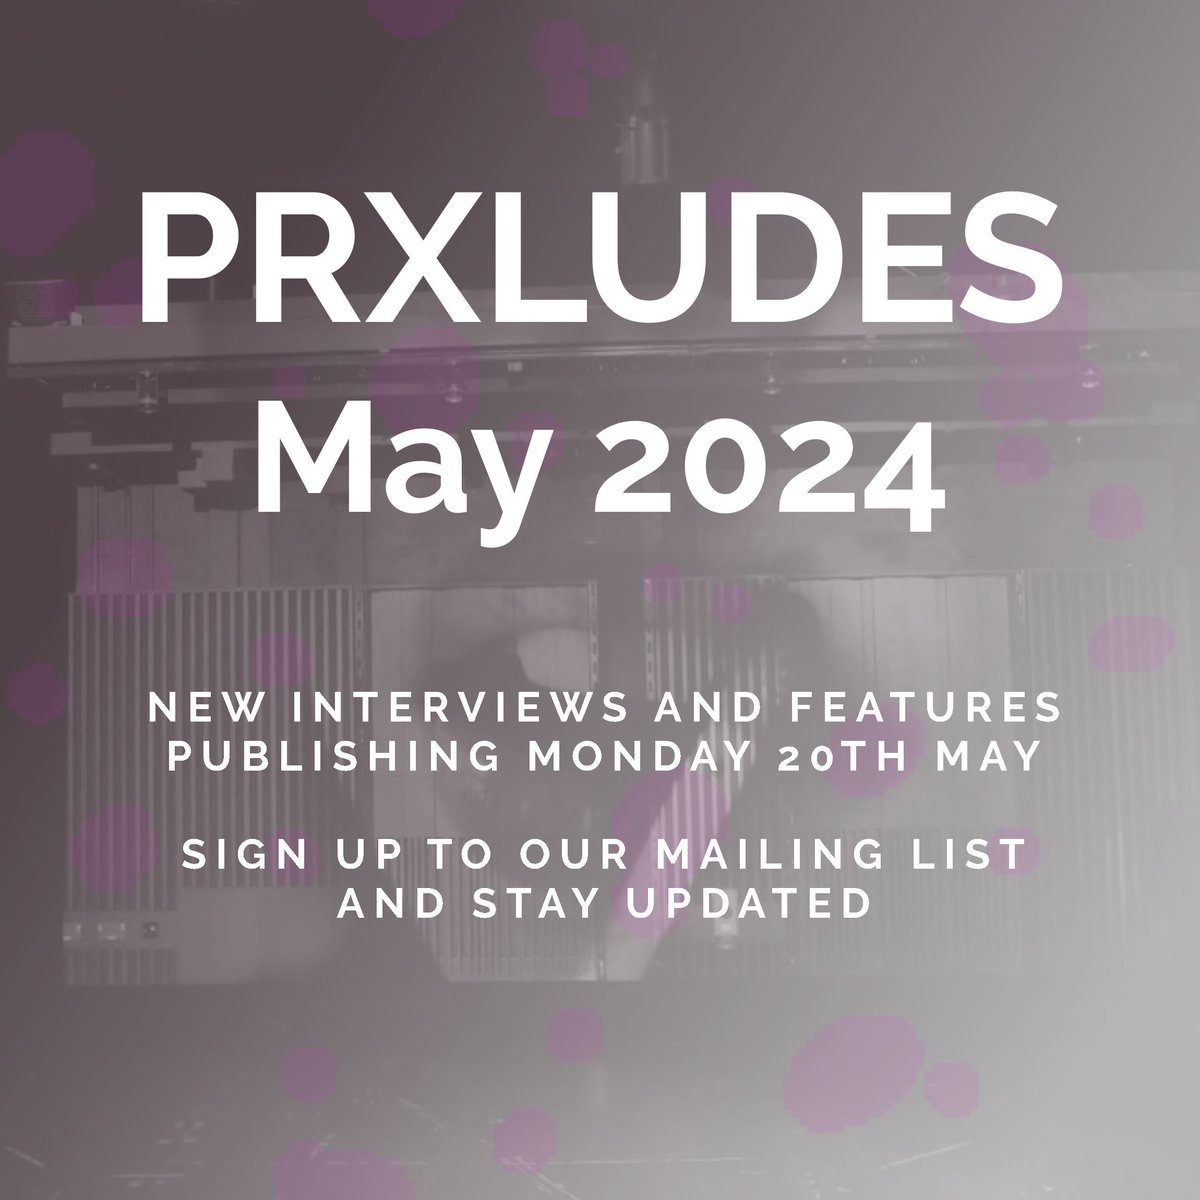 Our May issue of PRXLUDES publishes this Monday 20th - sign up to our mailing list and don't miss out... 👀 buff.ly/49pq8v5